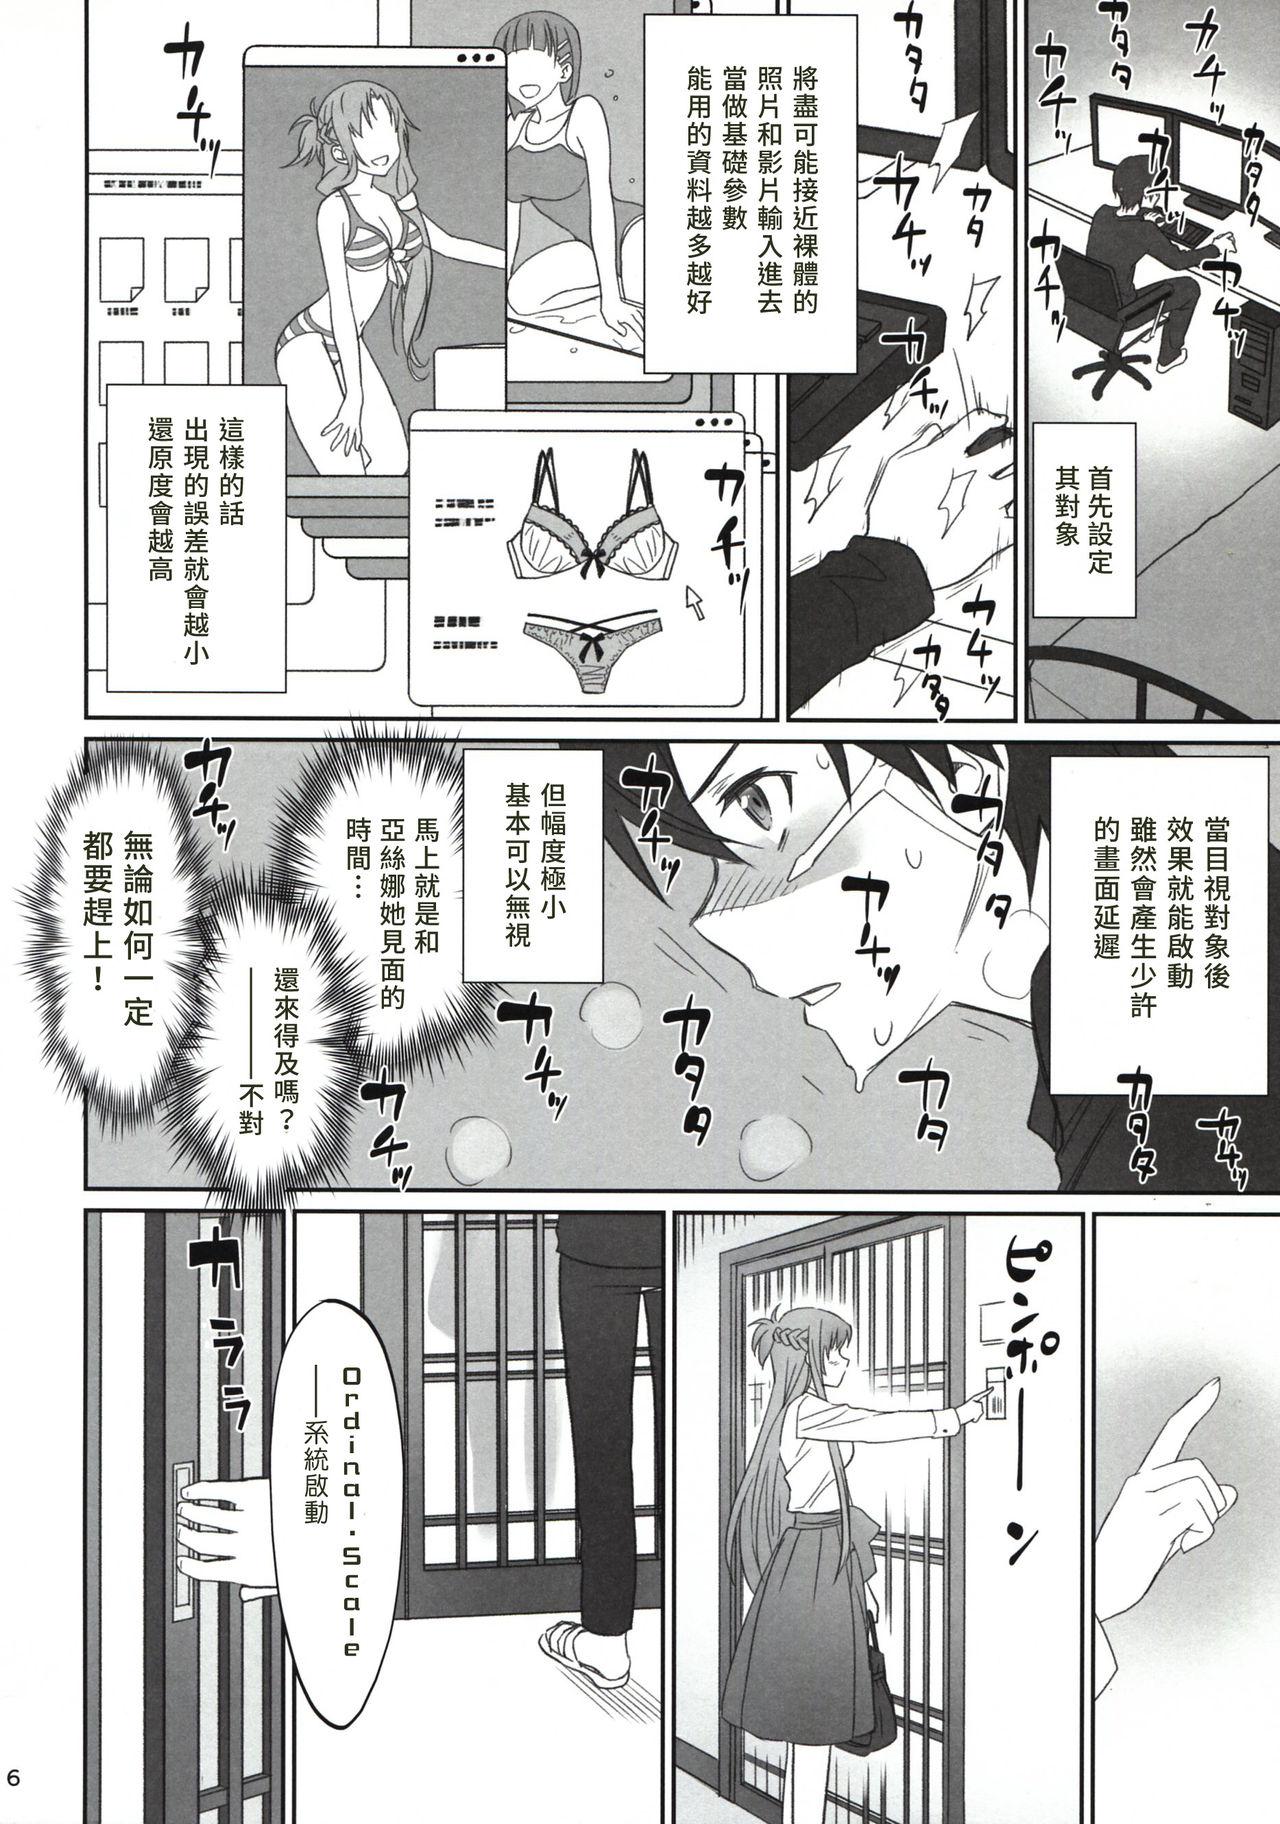 Blackmail Voyeuristic Disorder - Sword art online Stepfamily - Page 6